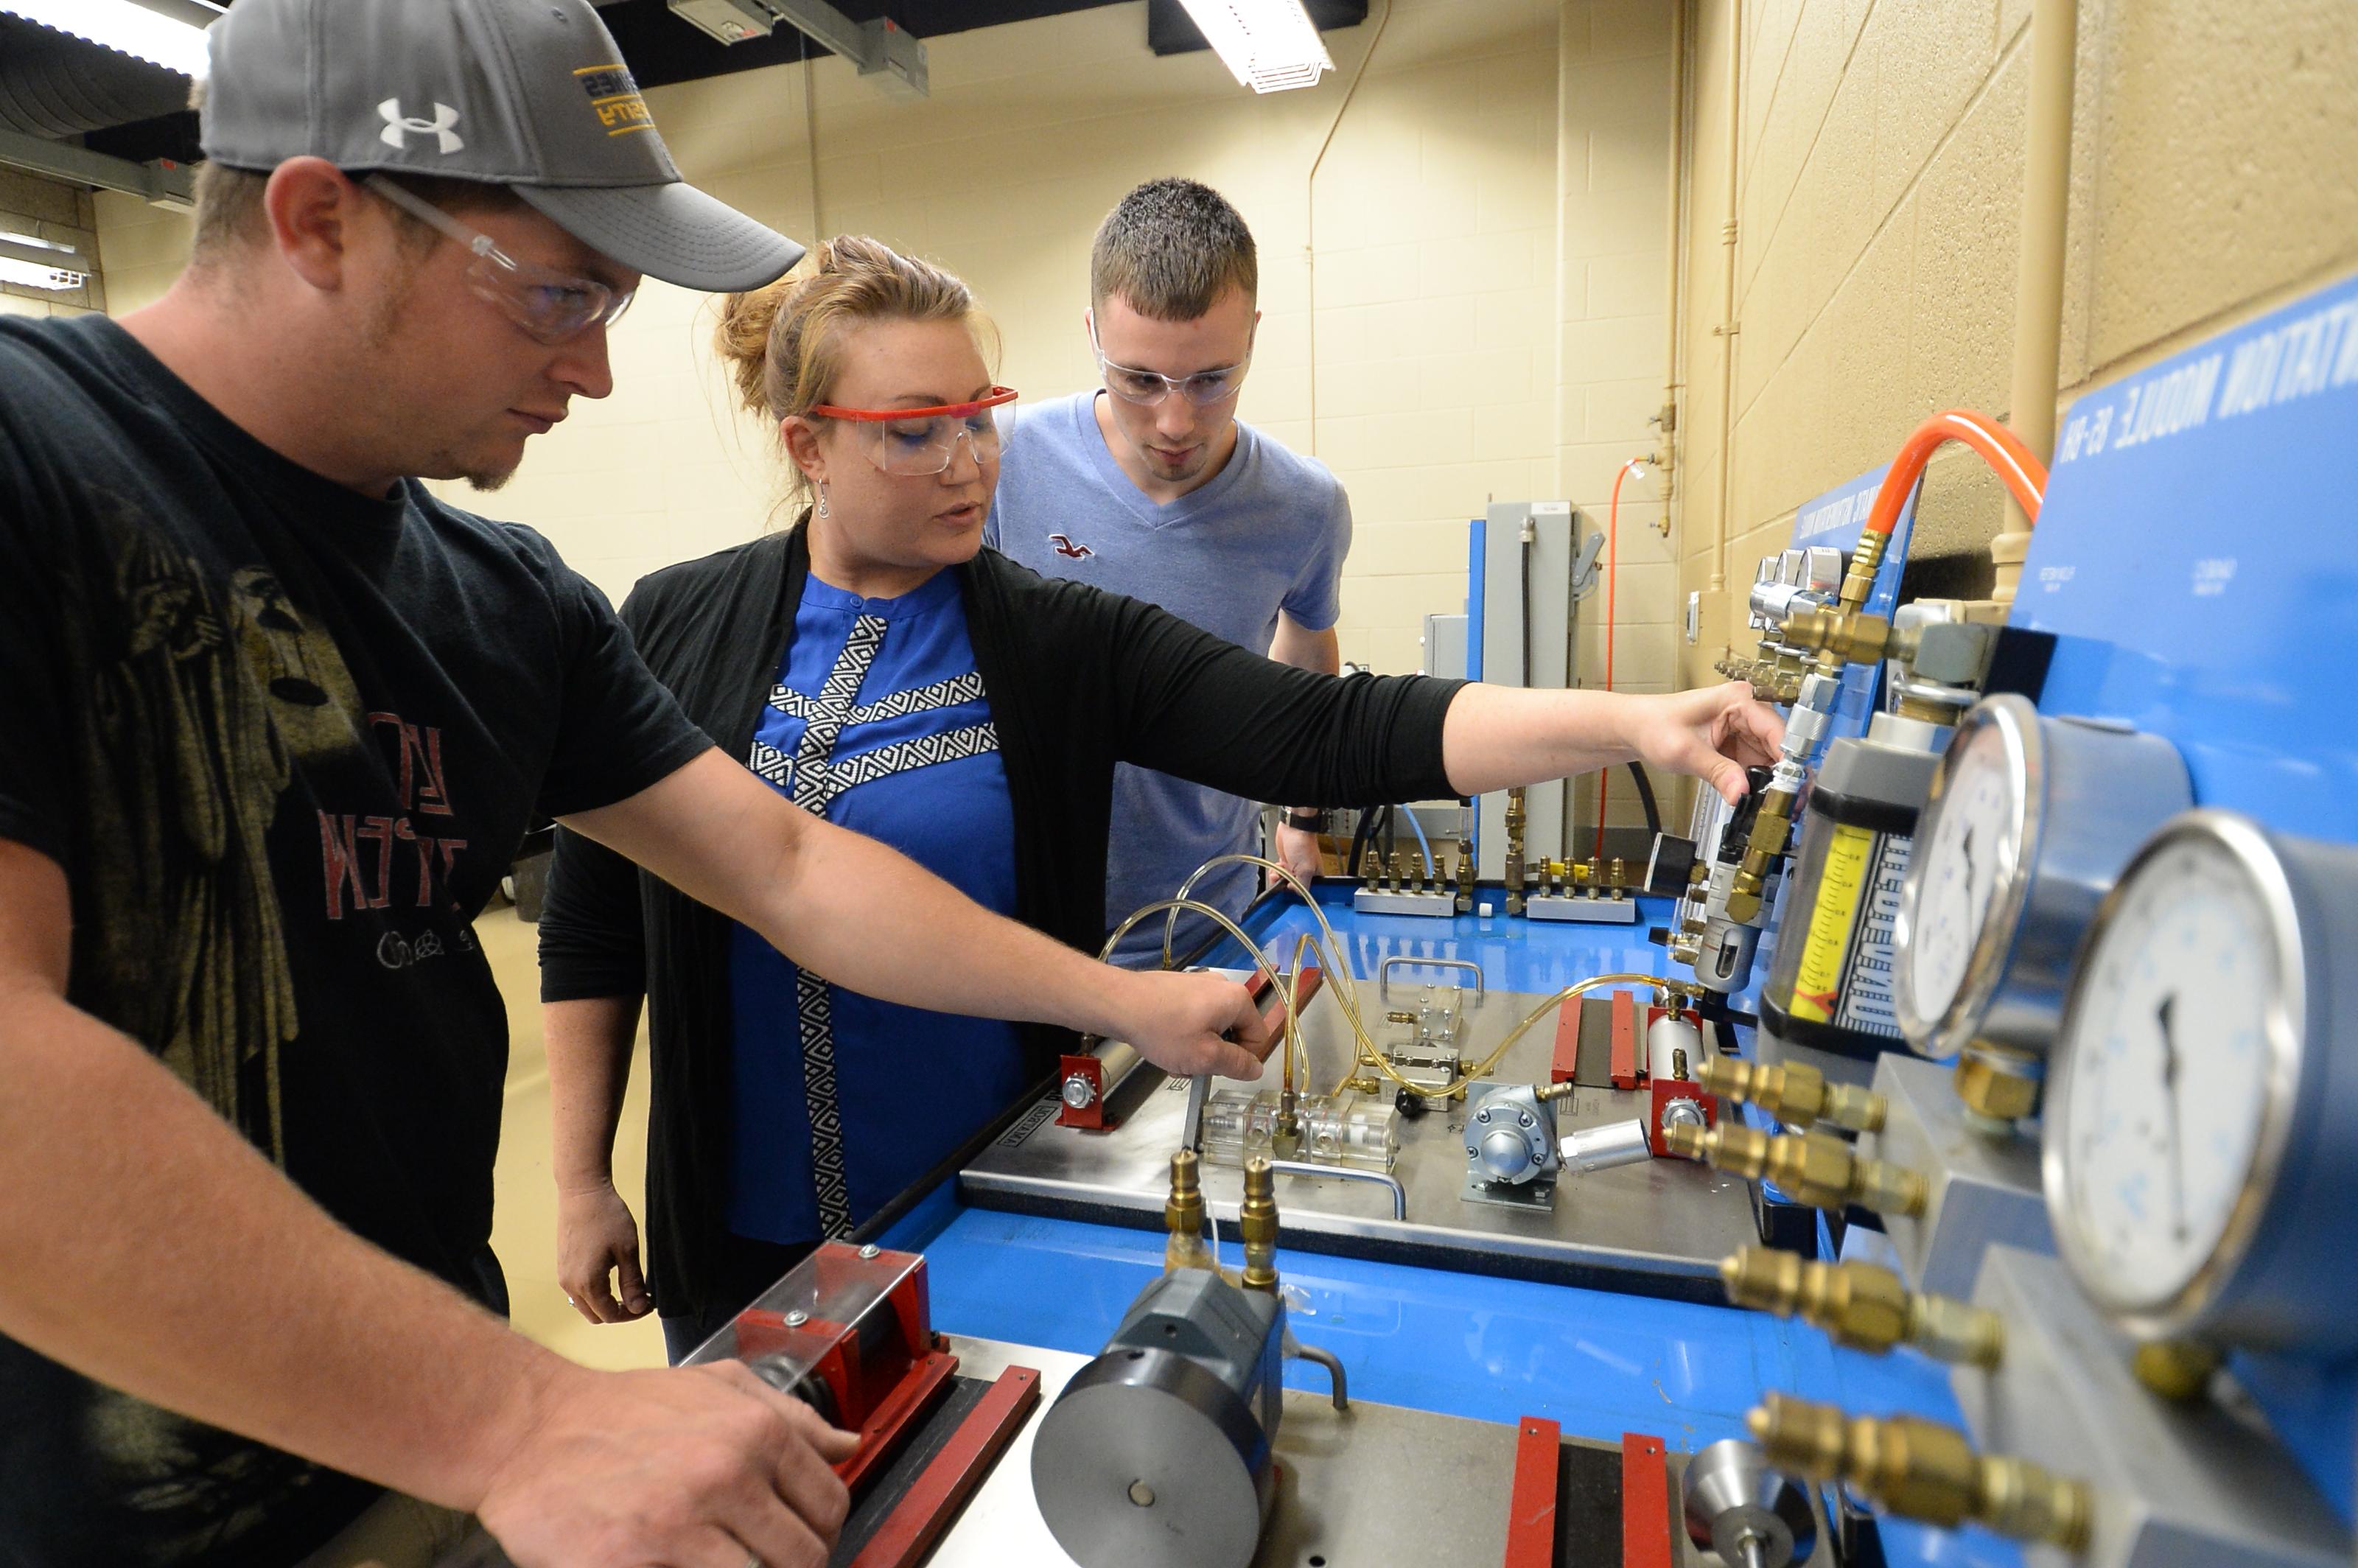 A female instructor shows two male students how to work the machinery in the shop